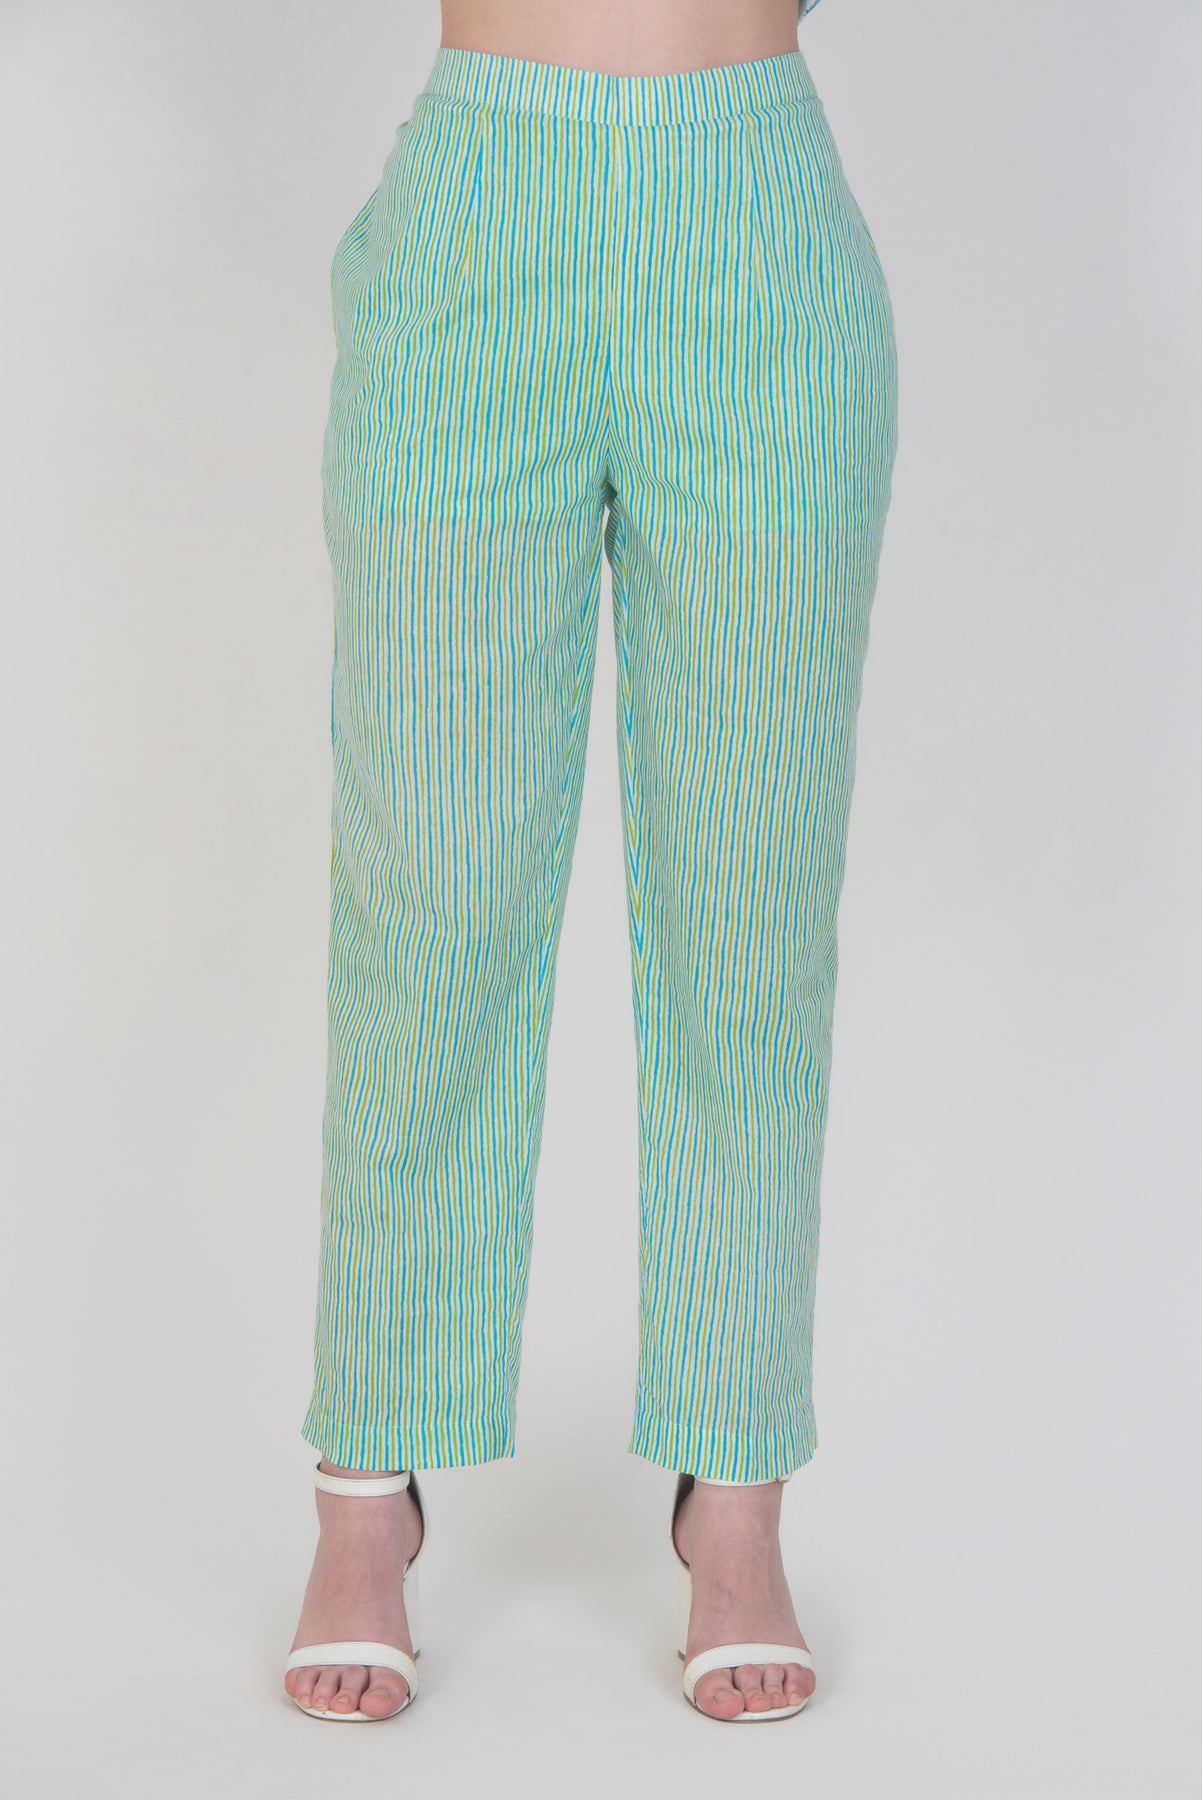 Buy COVER STORY Womens 4 Pocket Striped Pants | Shoppers Stop